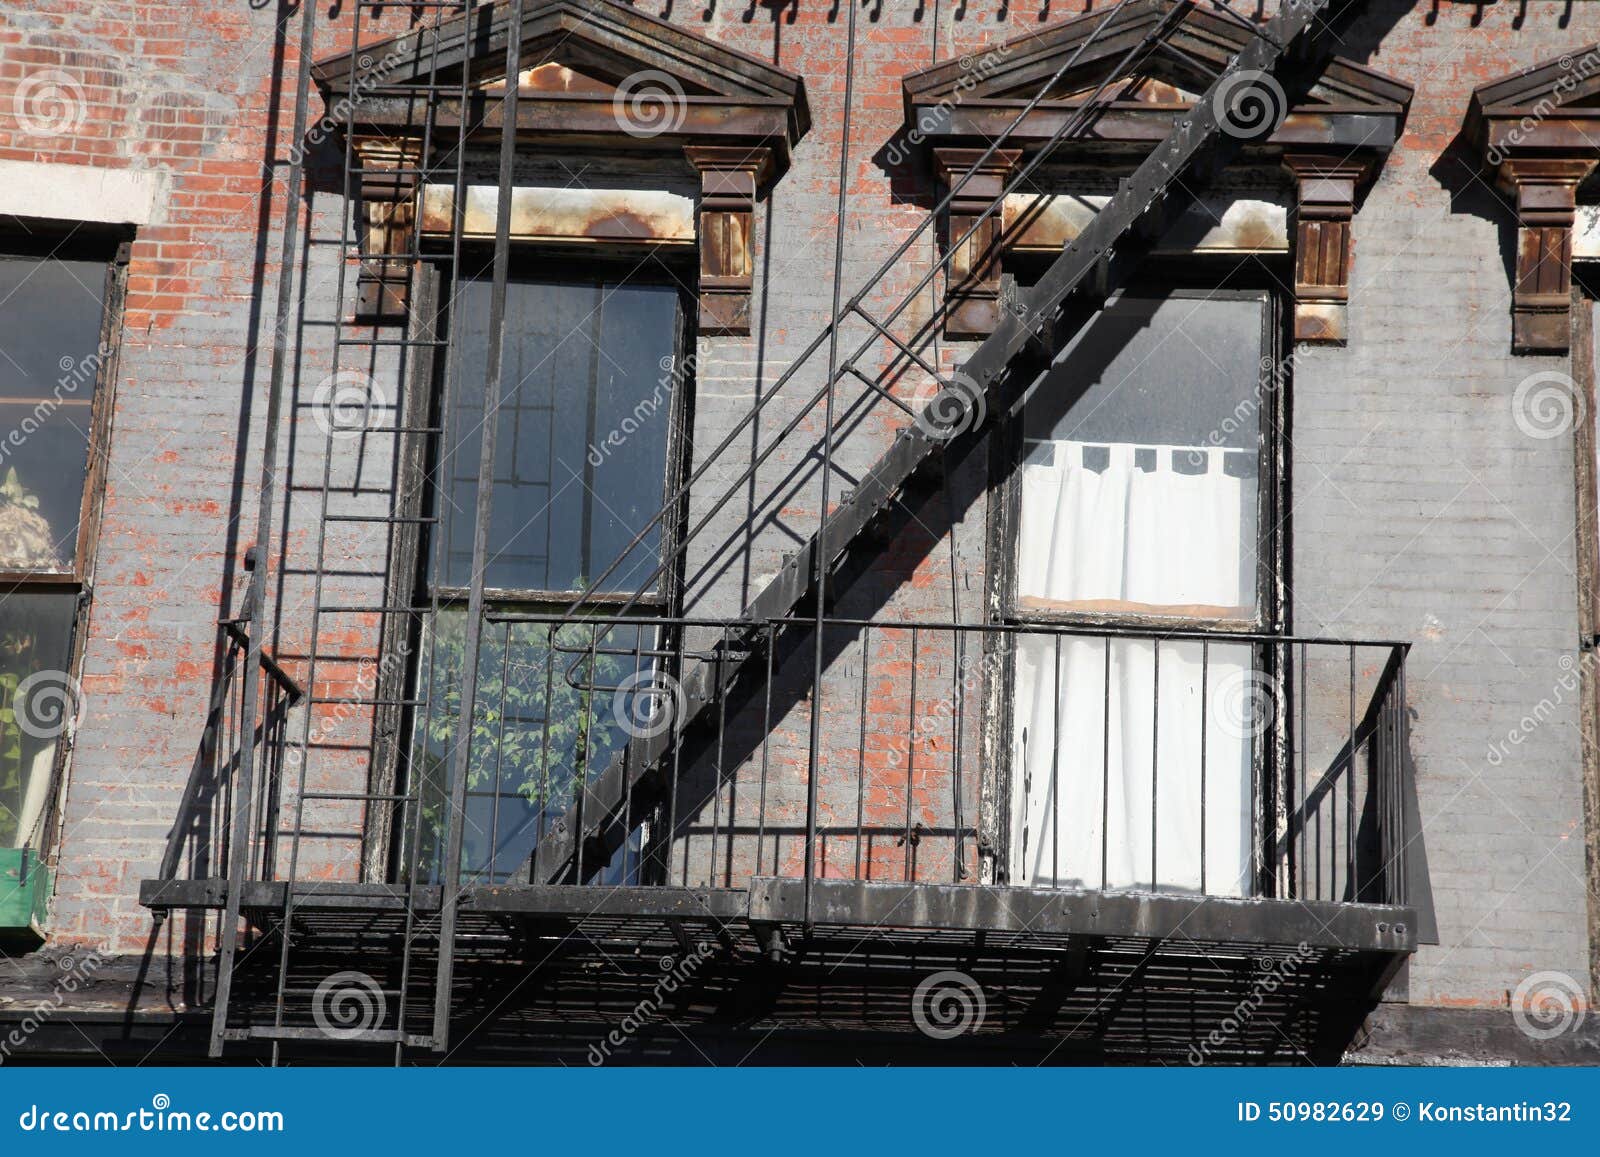 windows and old stairways